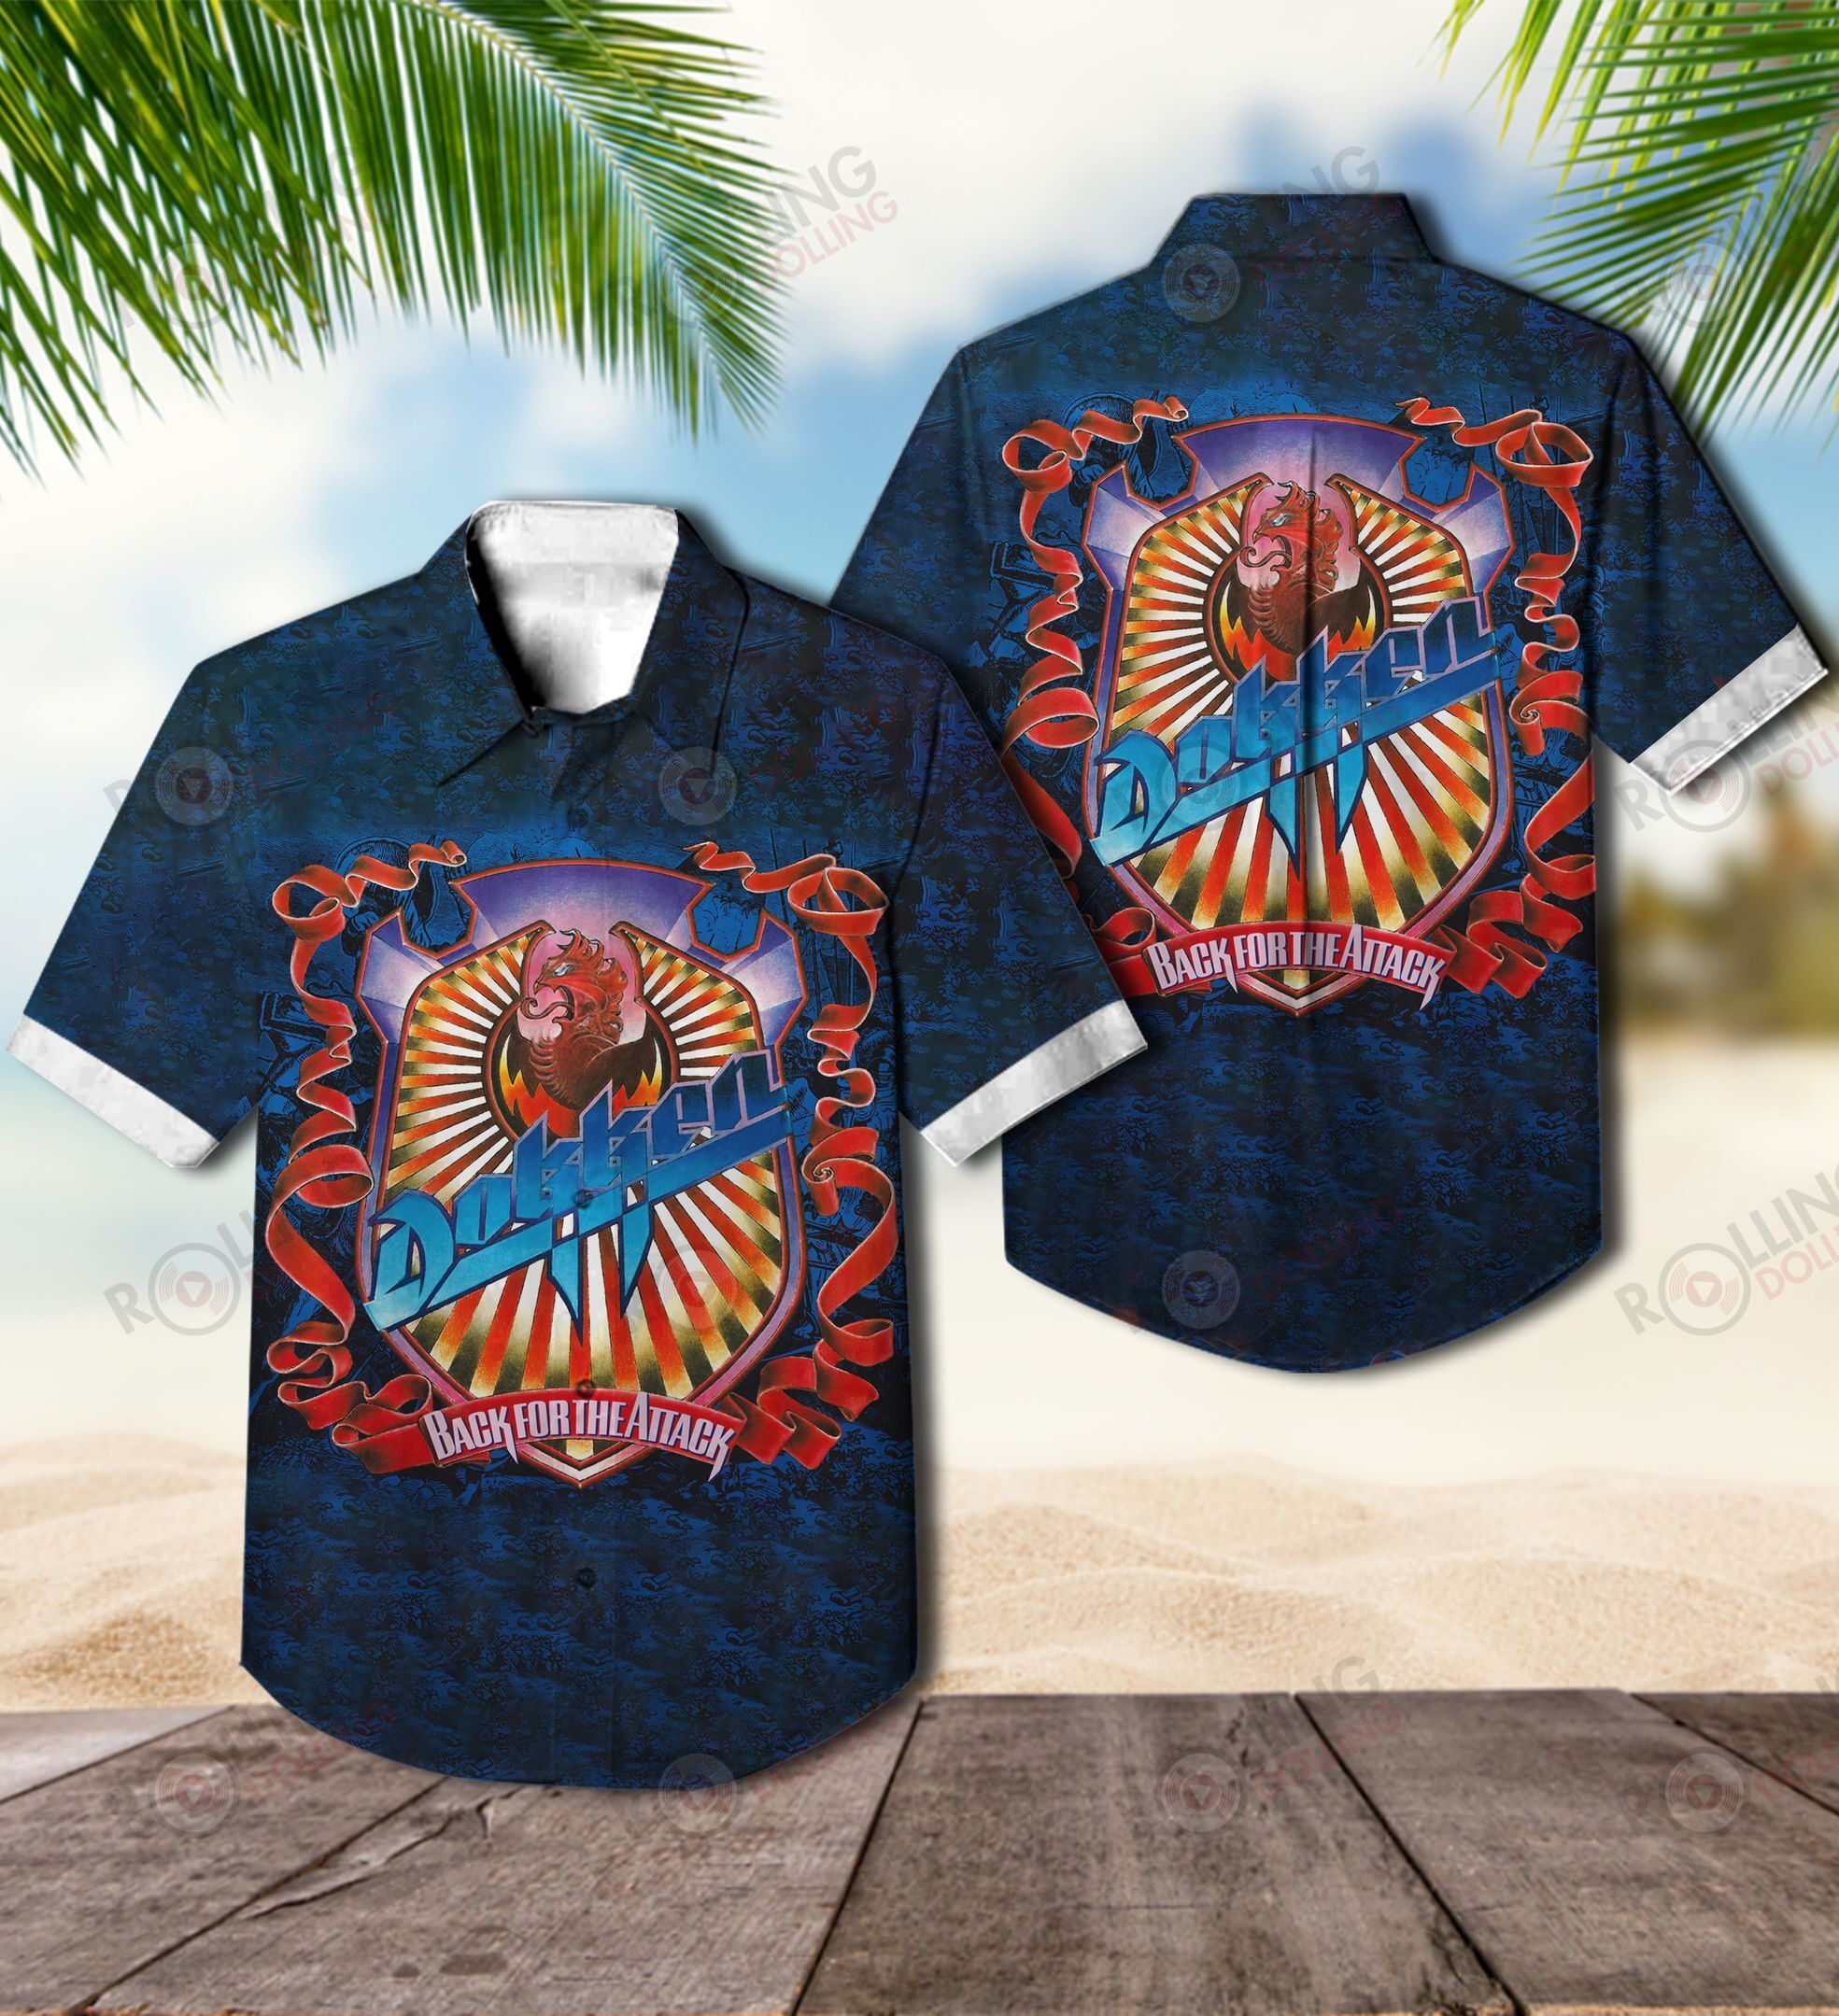 Now you can show off your love of all things band with this Hawaiian Shirt 23